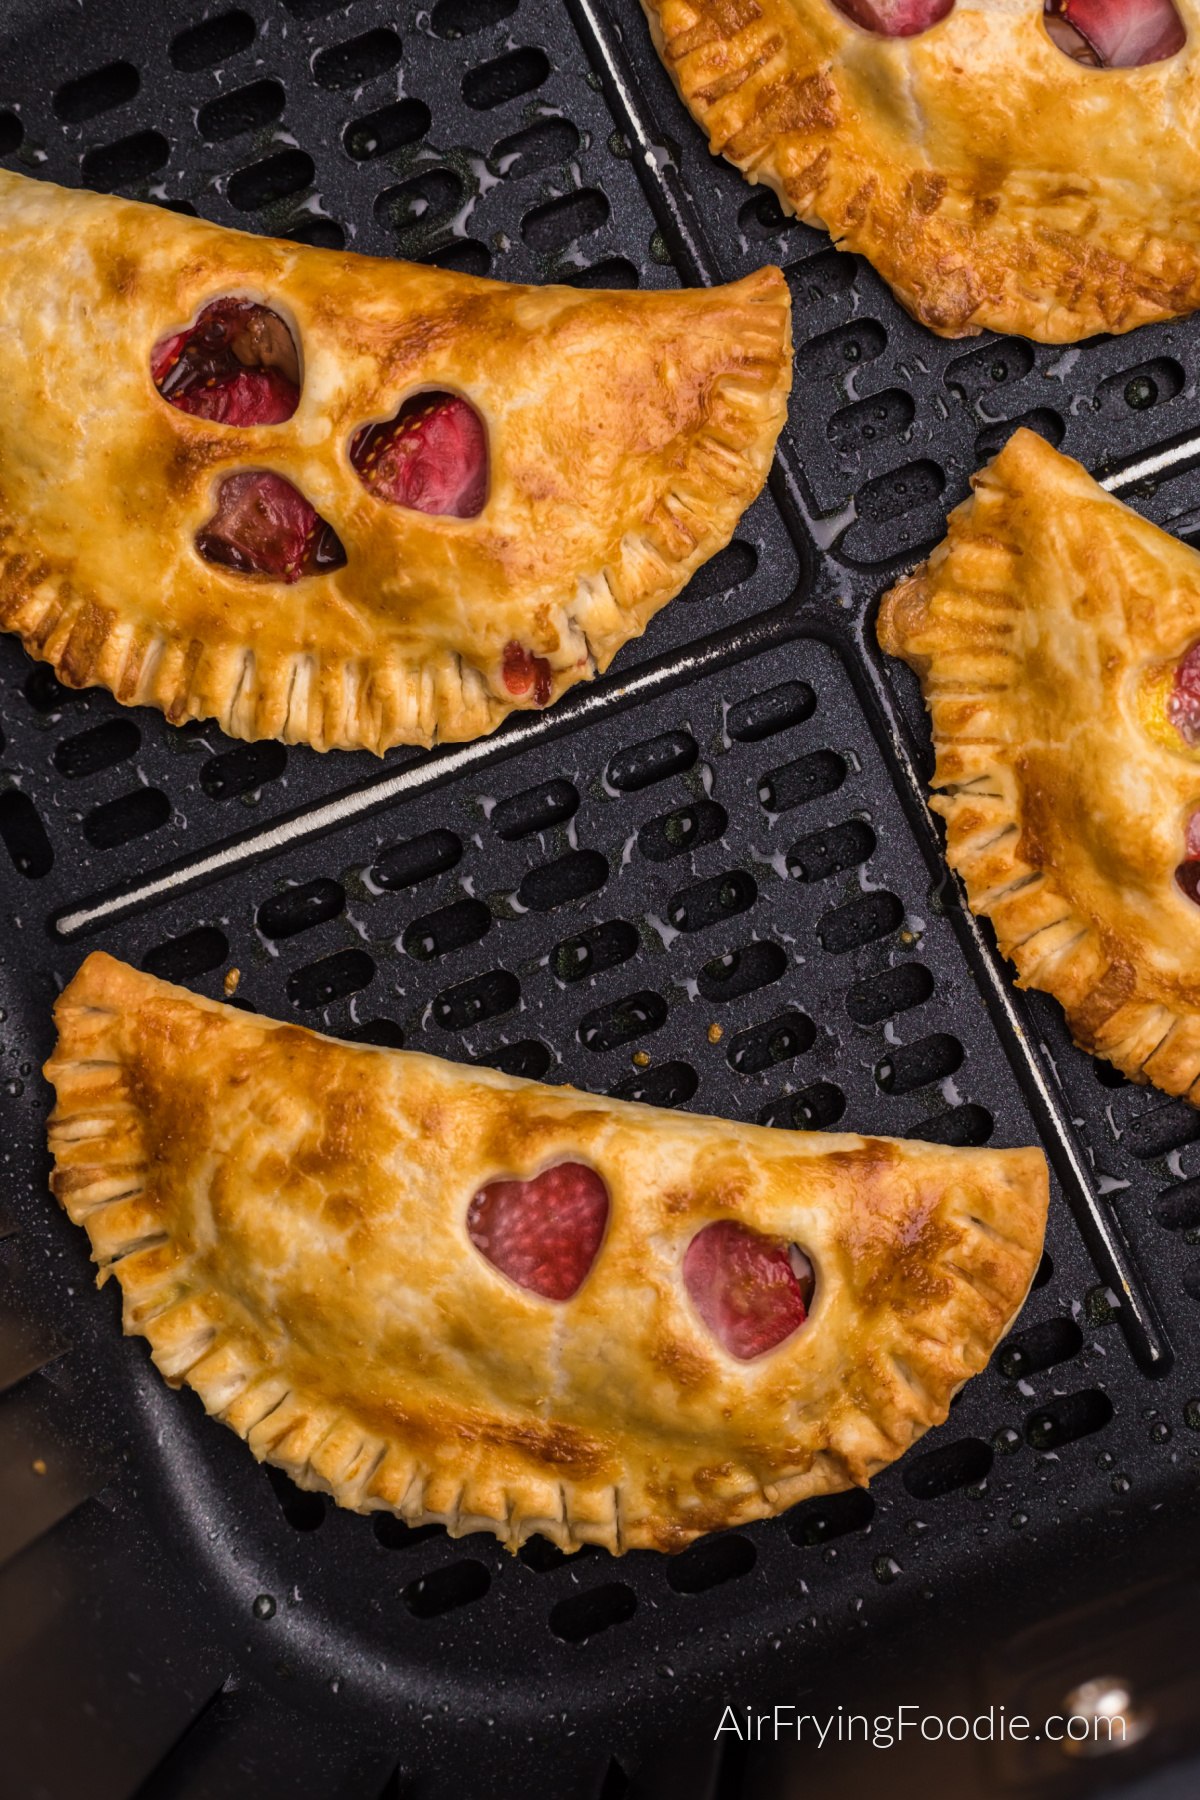 Strawberry Nutella hand pies in the basket of the air fryer, golden brown and ready to serve.